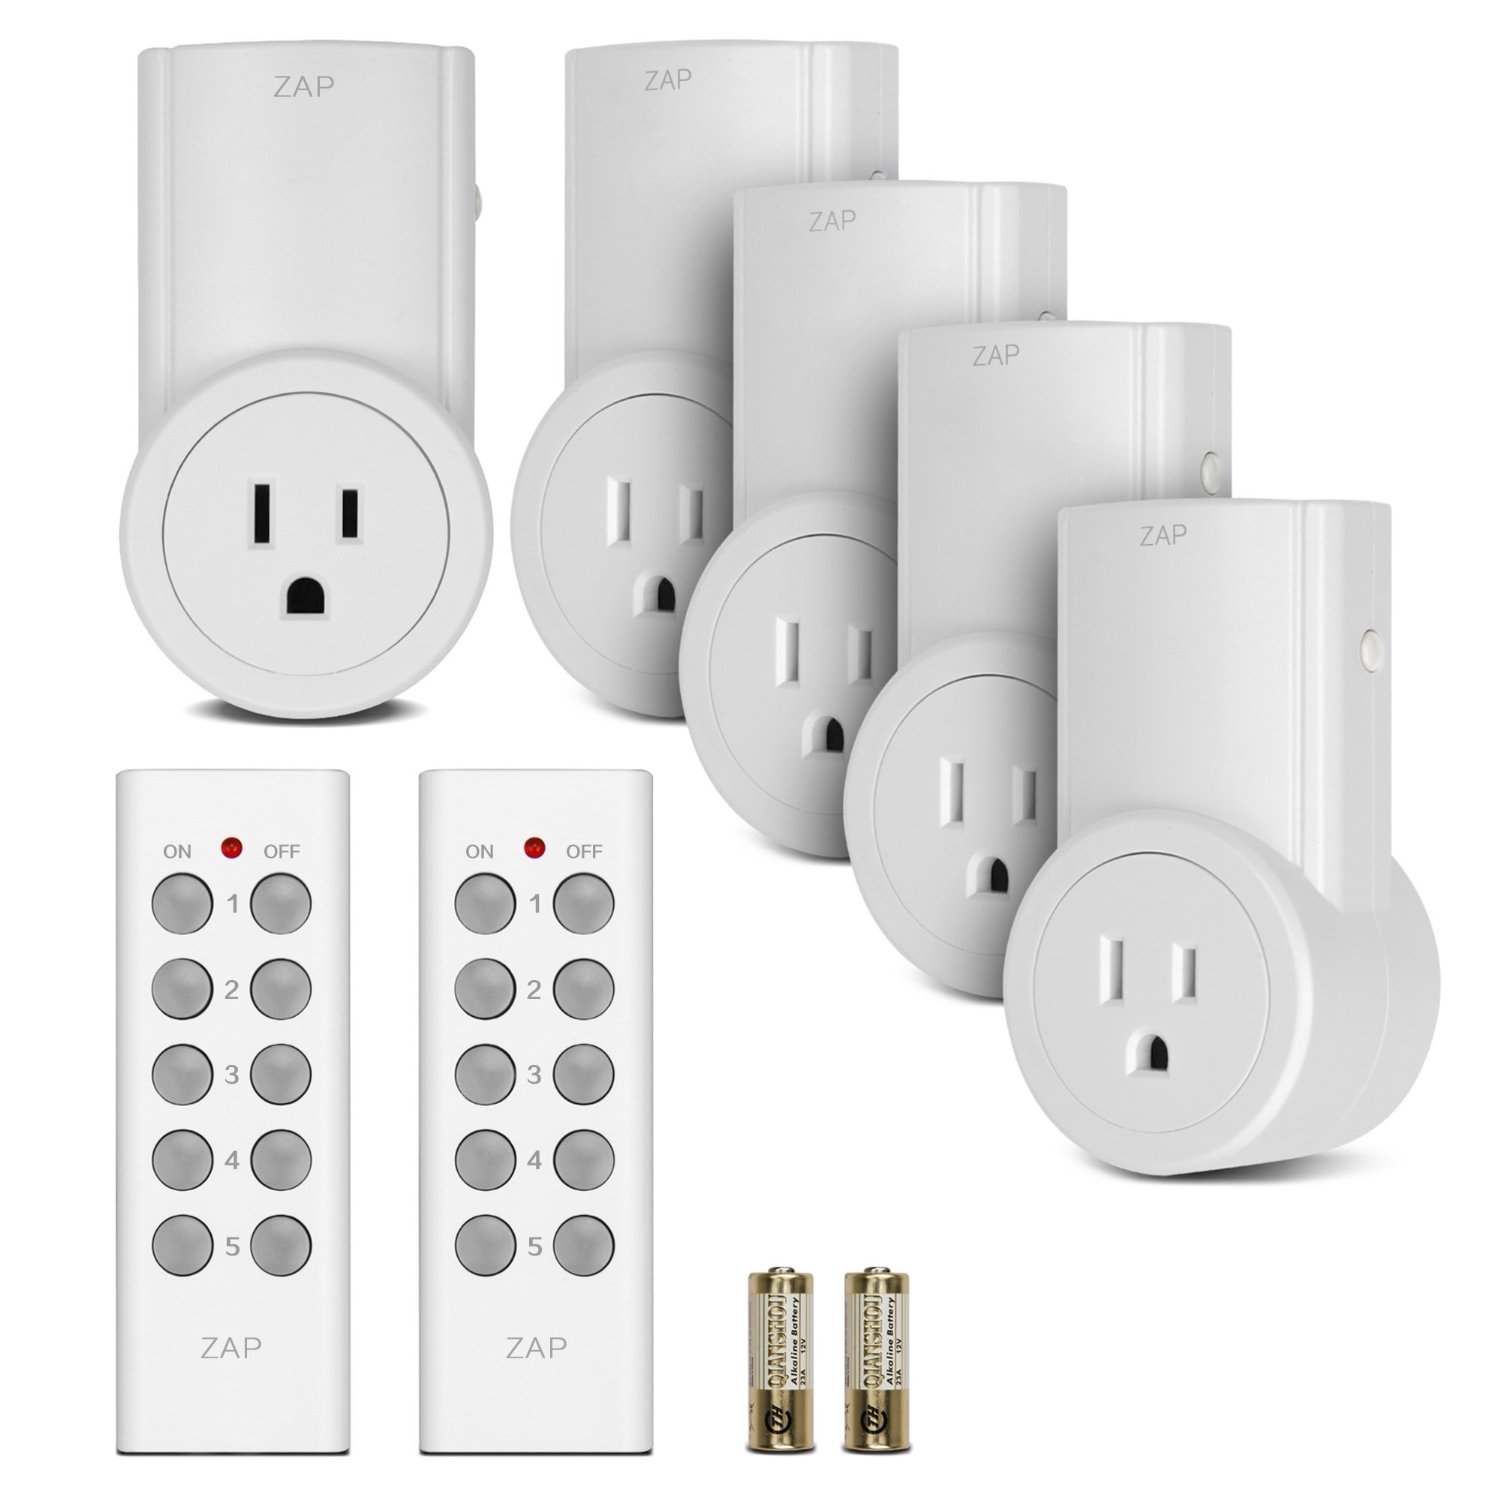 Etekcity Wireless Remote Control Electrical Outlet Switch for